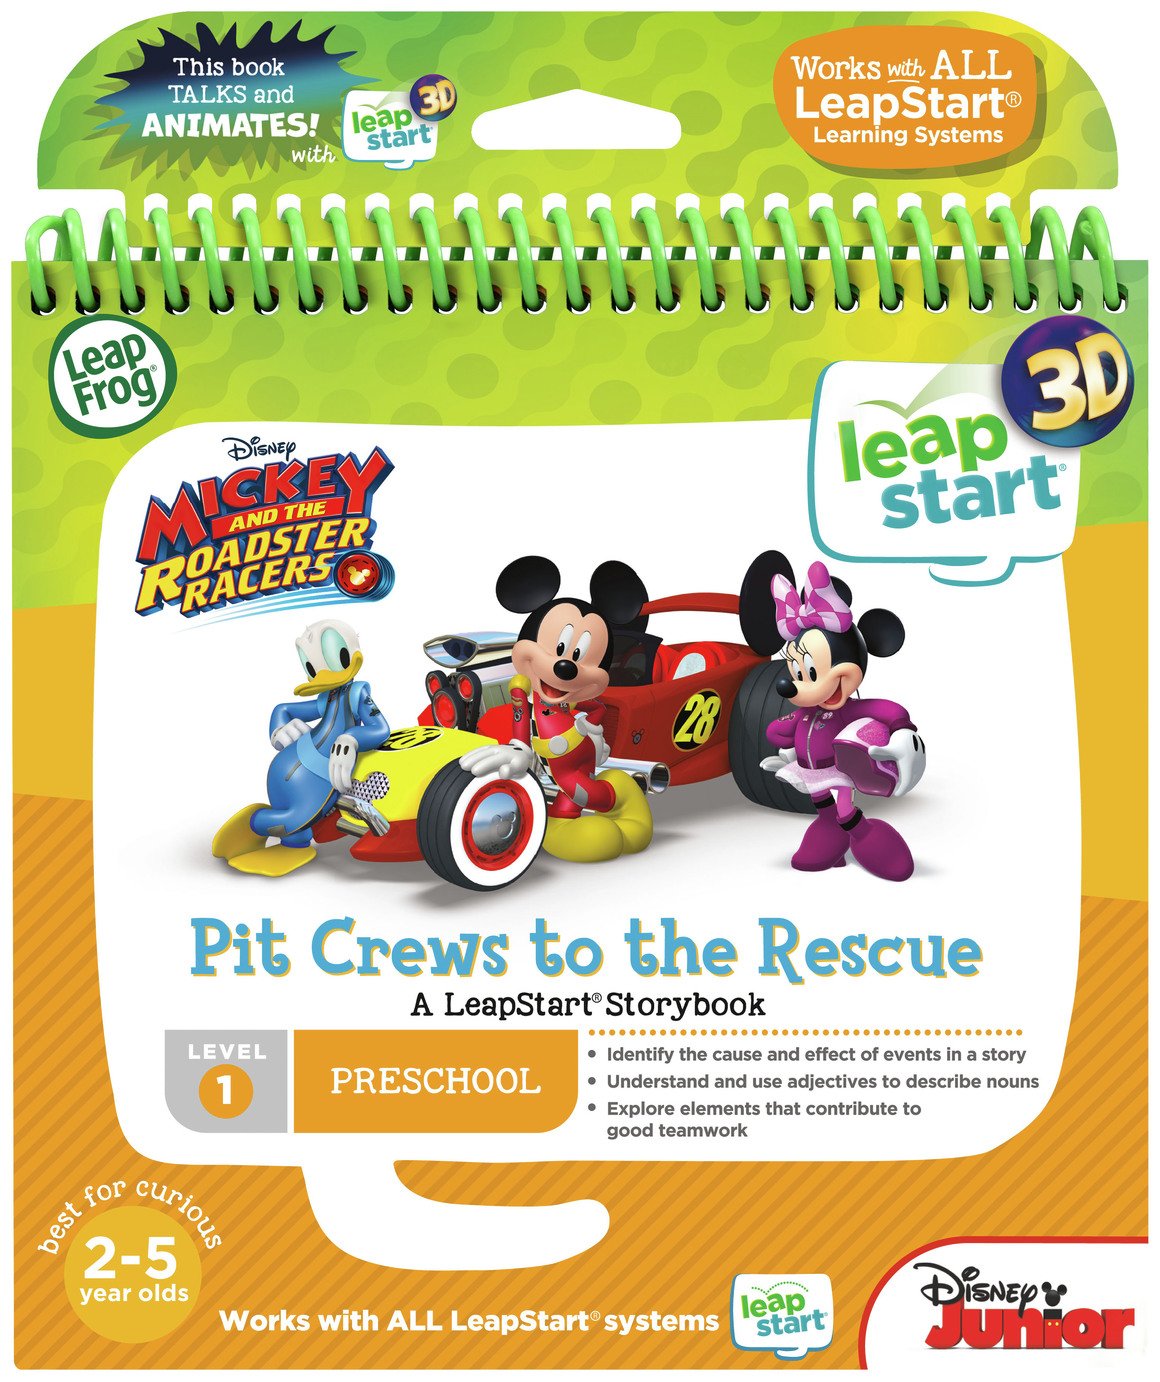 Leapfrog Leapstart and the Roadster Racers Activity Book